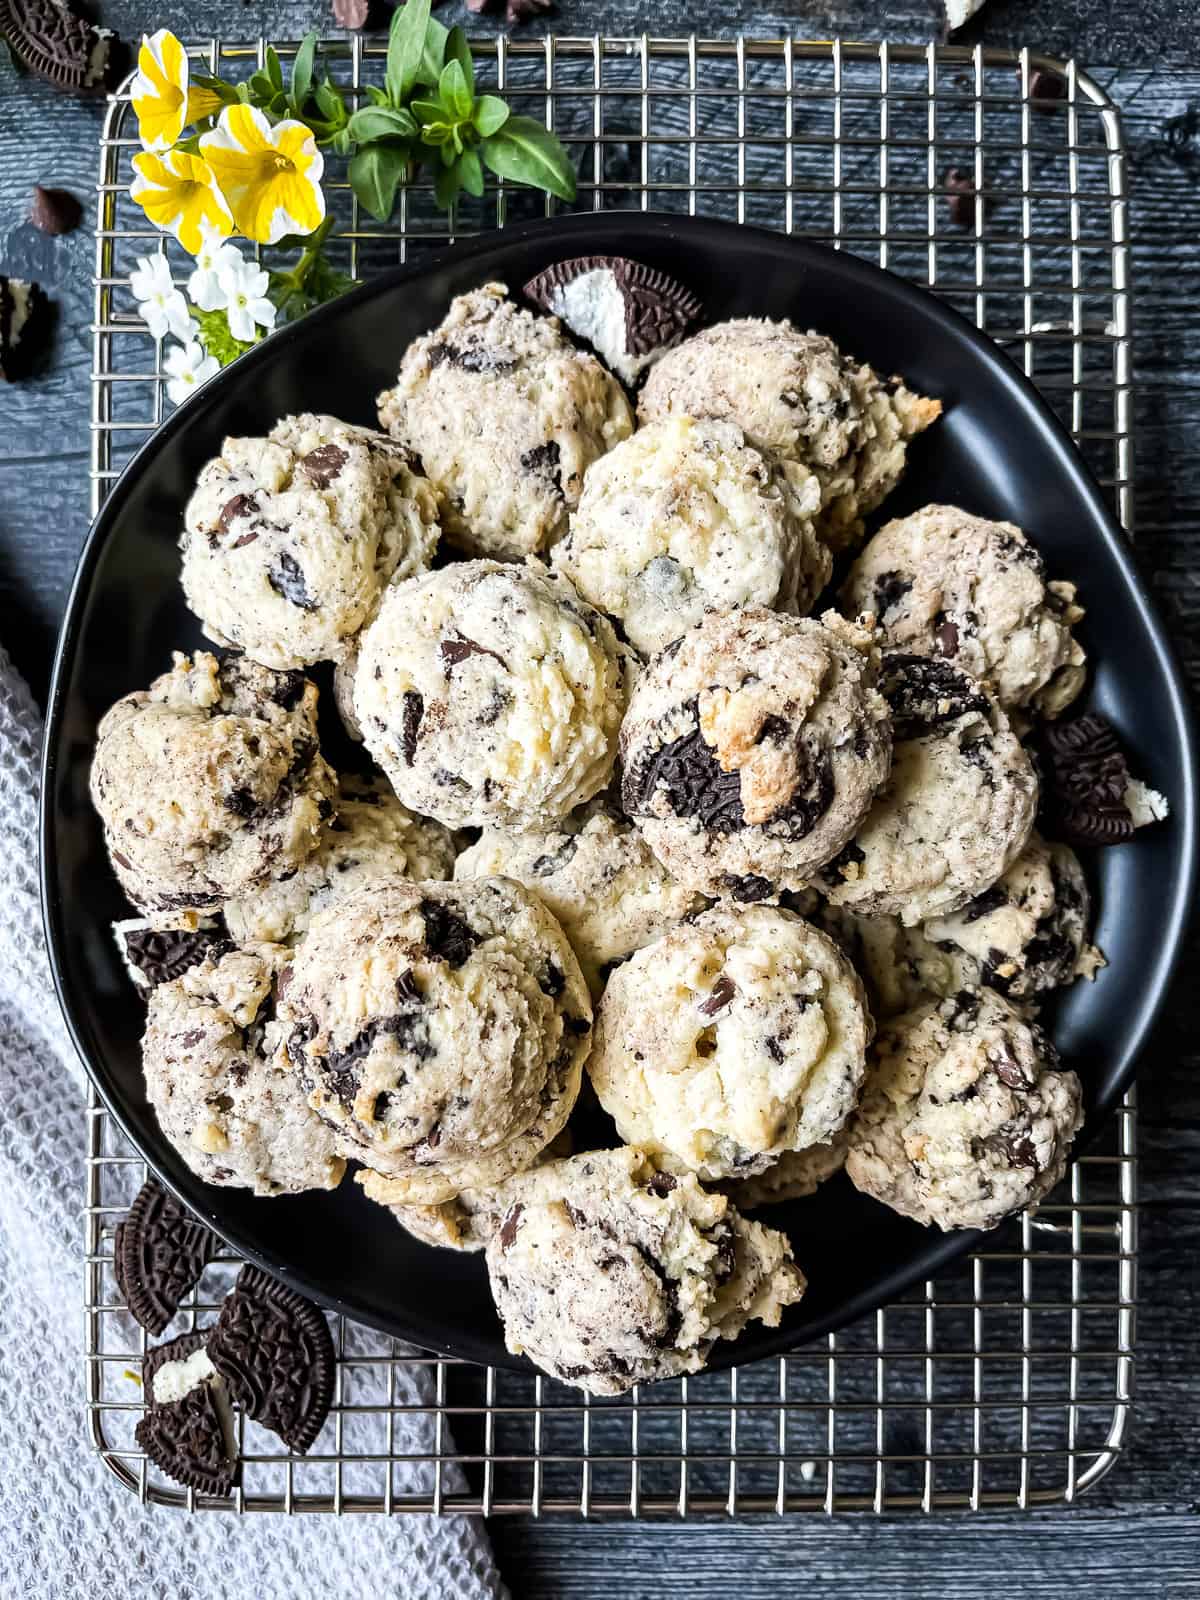 Chocolate Cream Cheese Crunch Cookies with cookie and chocolate garnishes. Flowers for decoration.